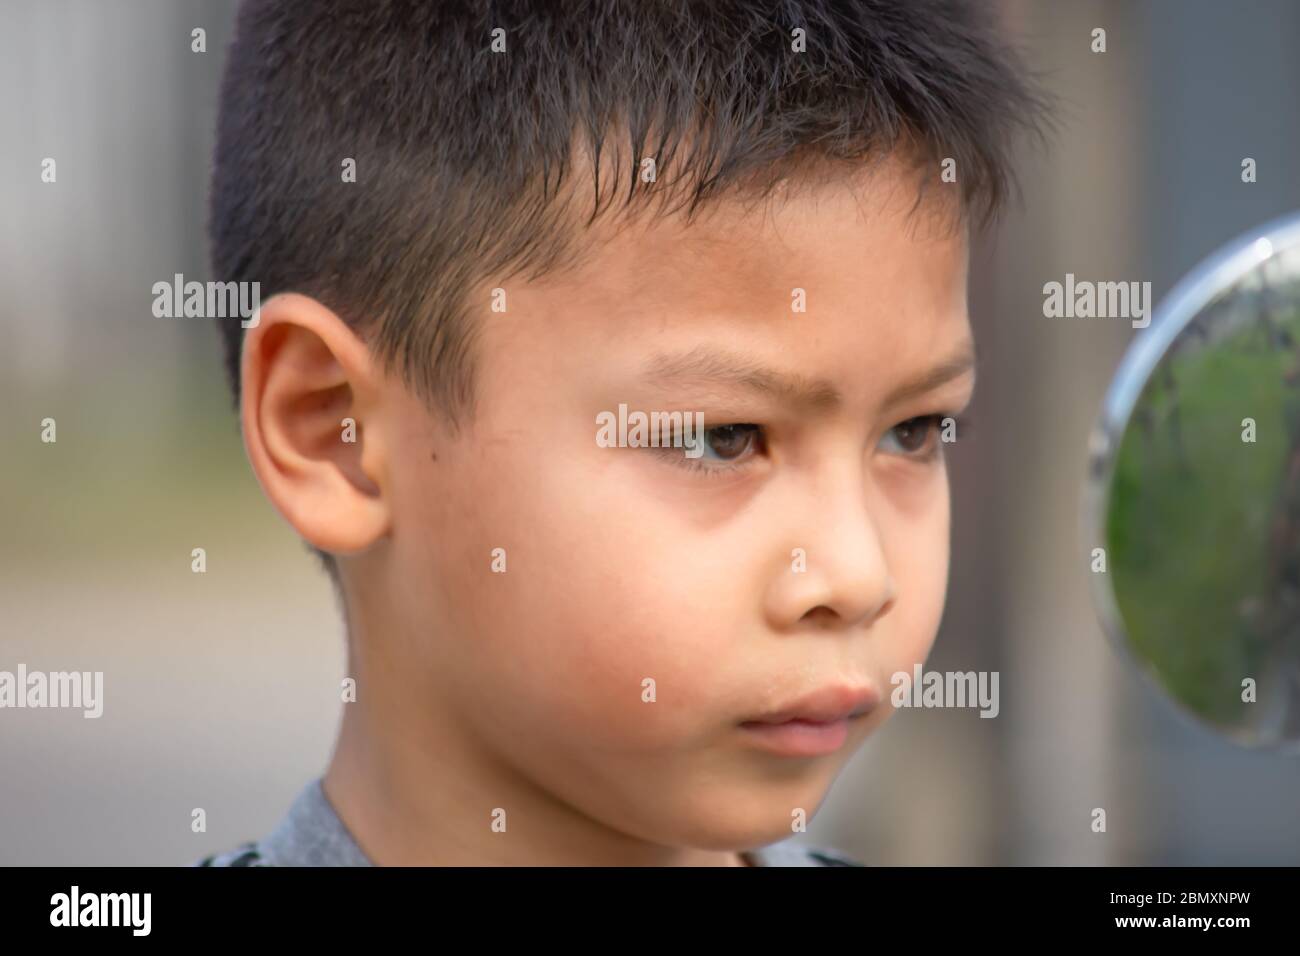 Portrait of Asian boy Tired expression Stock Photo